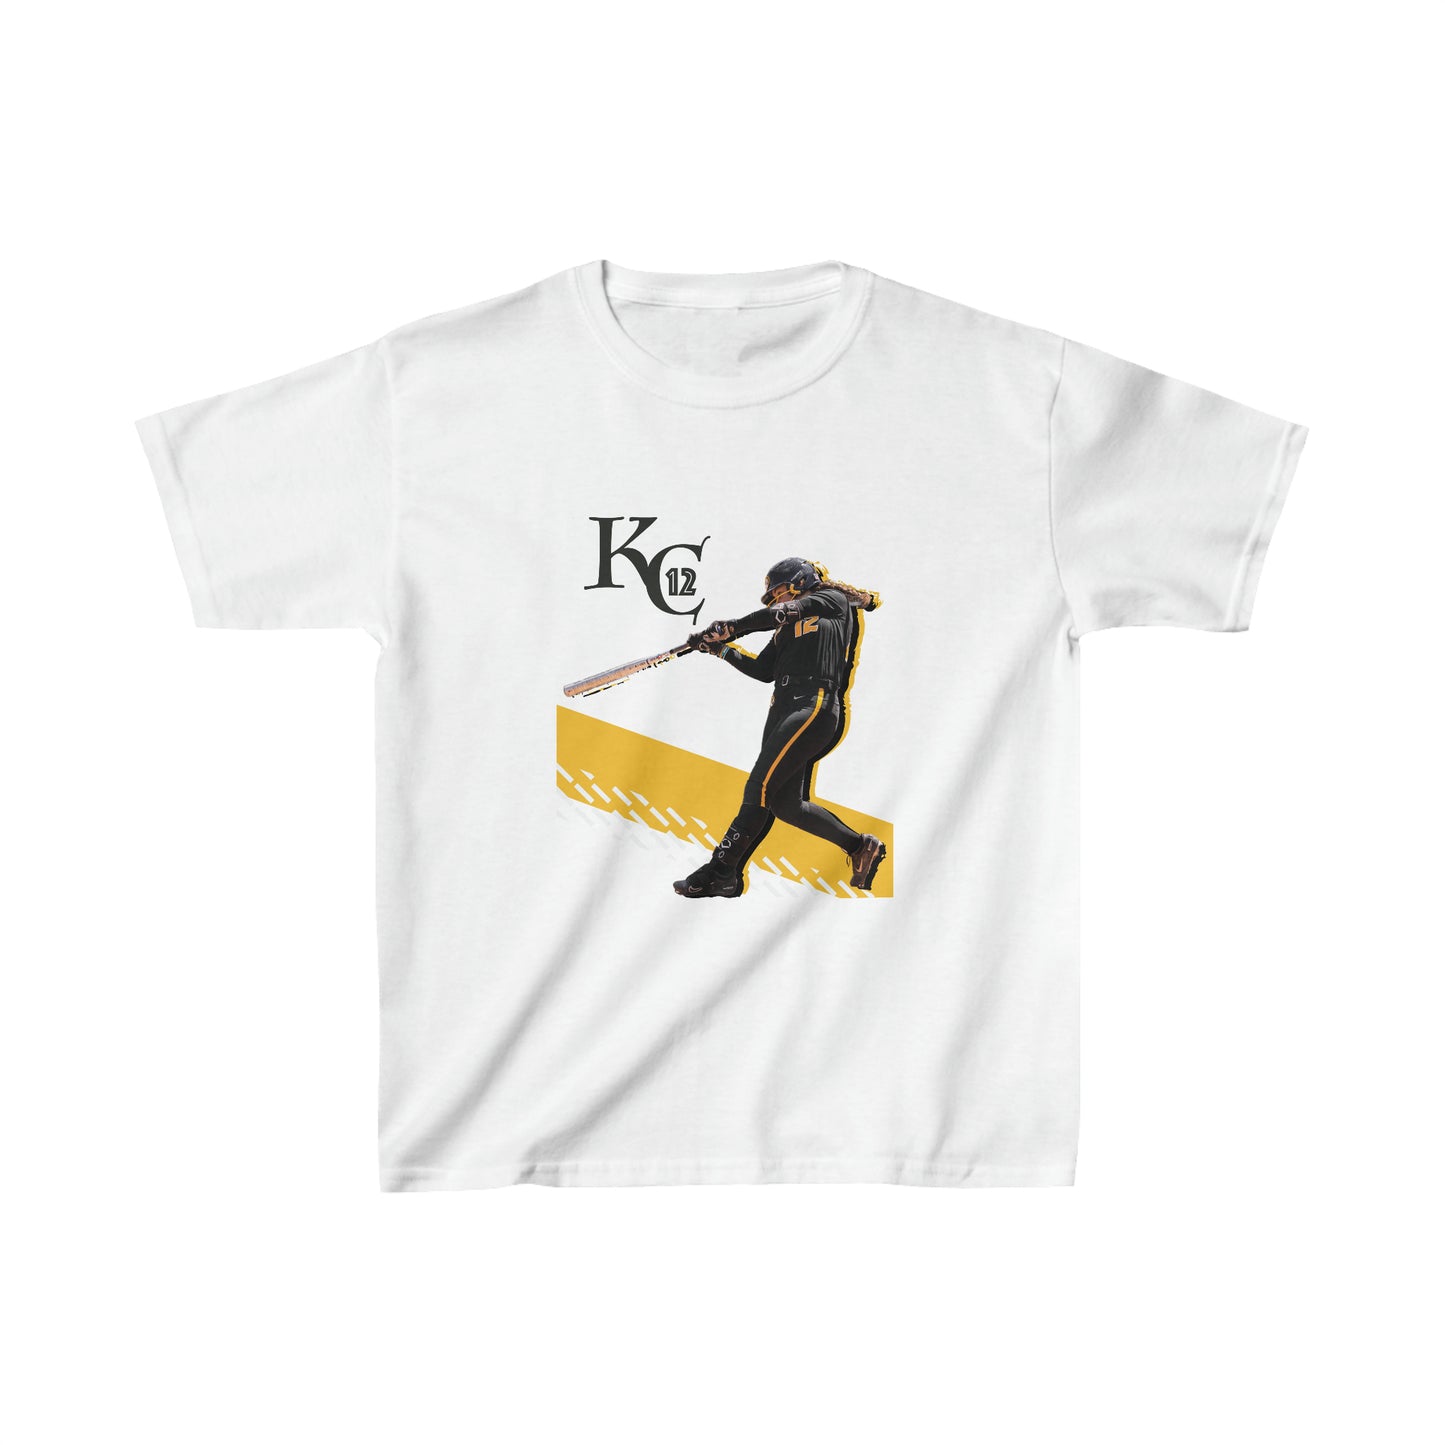 Katie Chester: GameDay Youth Tee